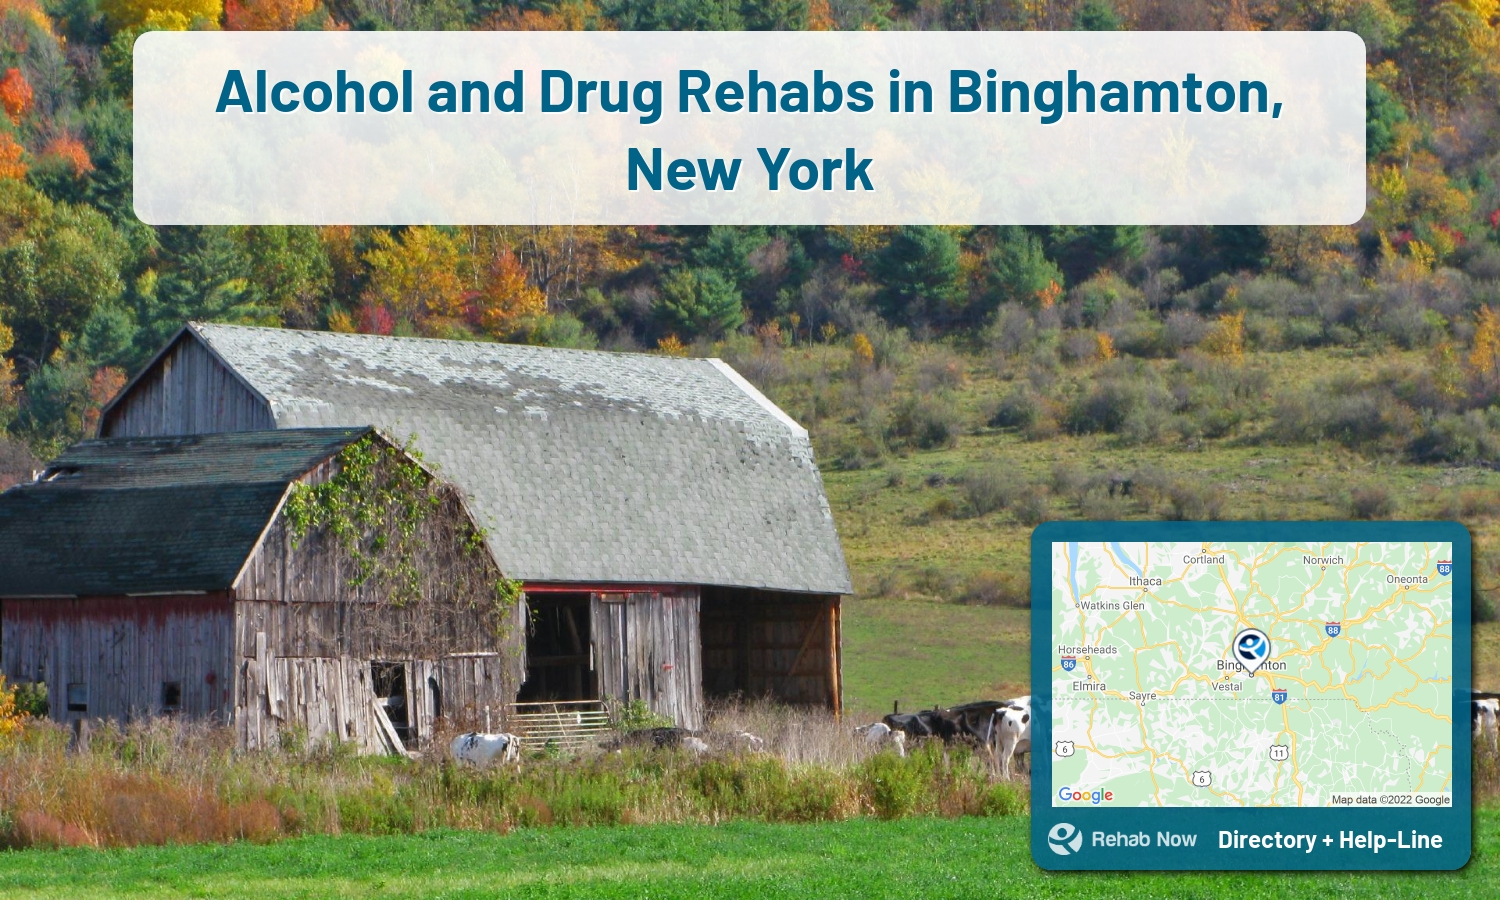 Binghamton, NY Treatment Centers. Find drug rehab in Binghamton, New York, or detox and treatment programs. Get the right help now!